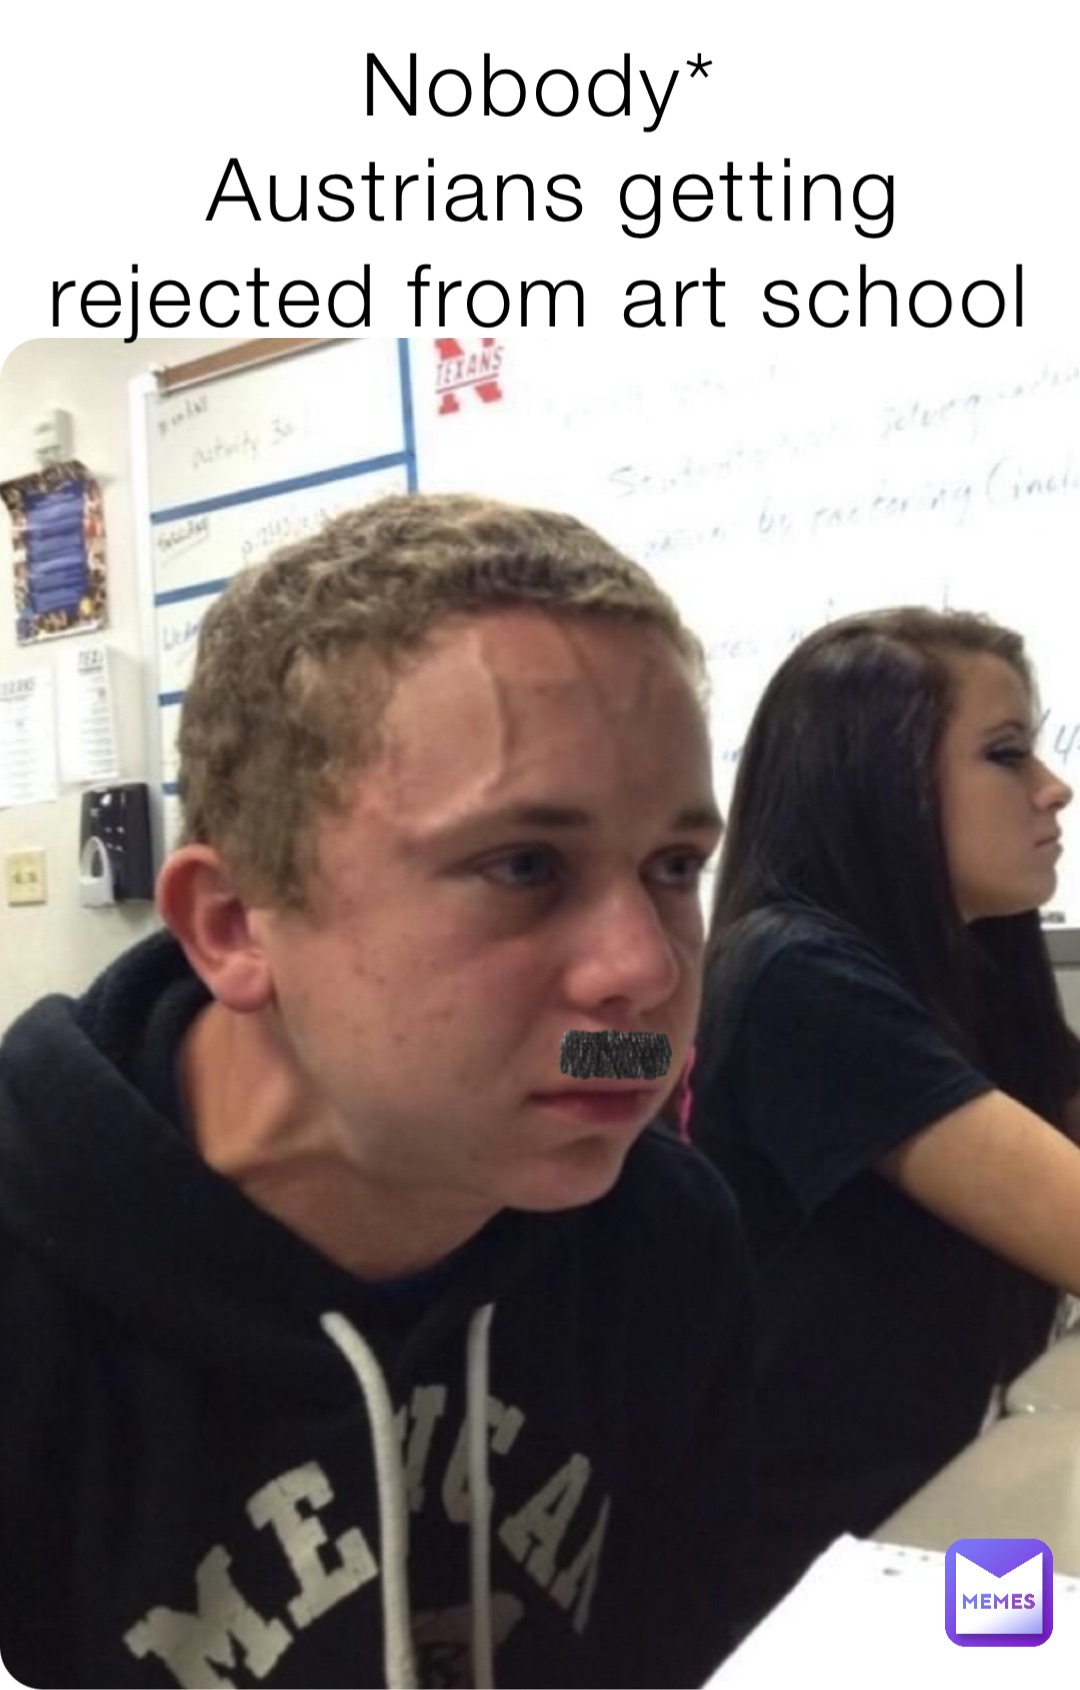 Nobody*
Austrians getting rejected from art school